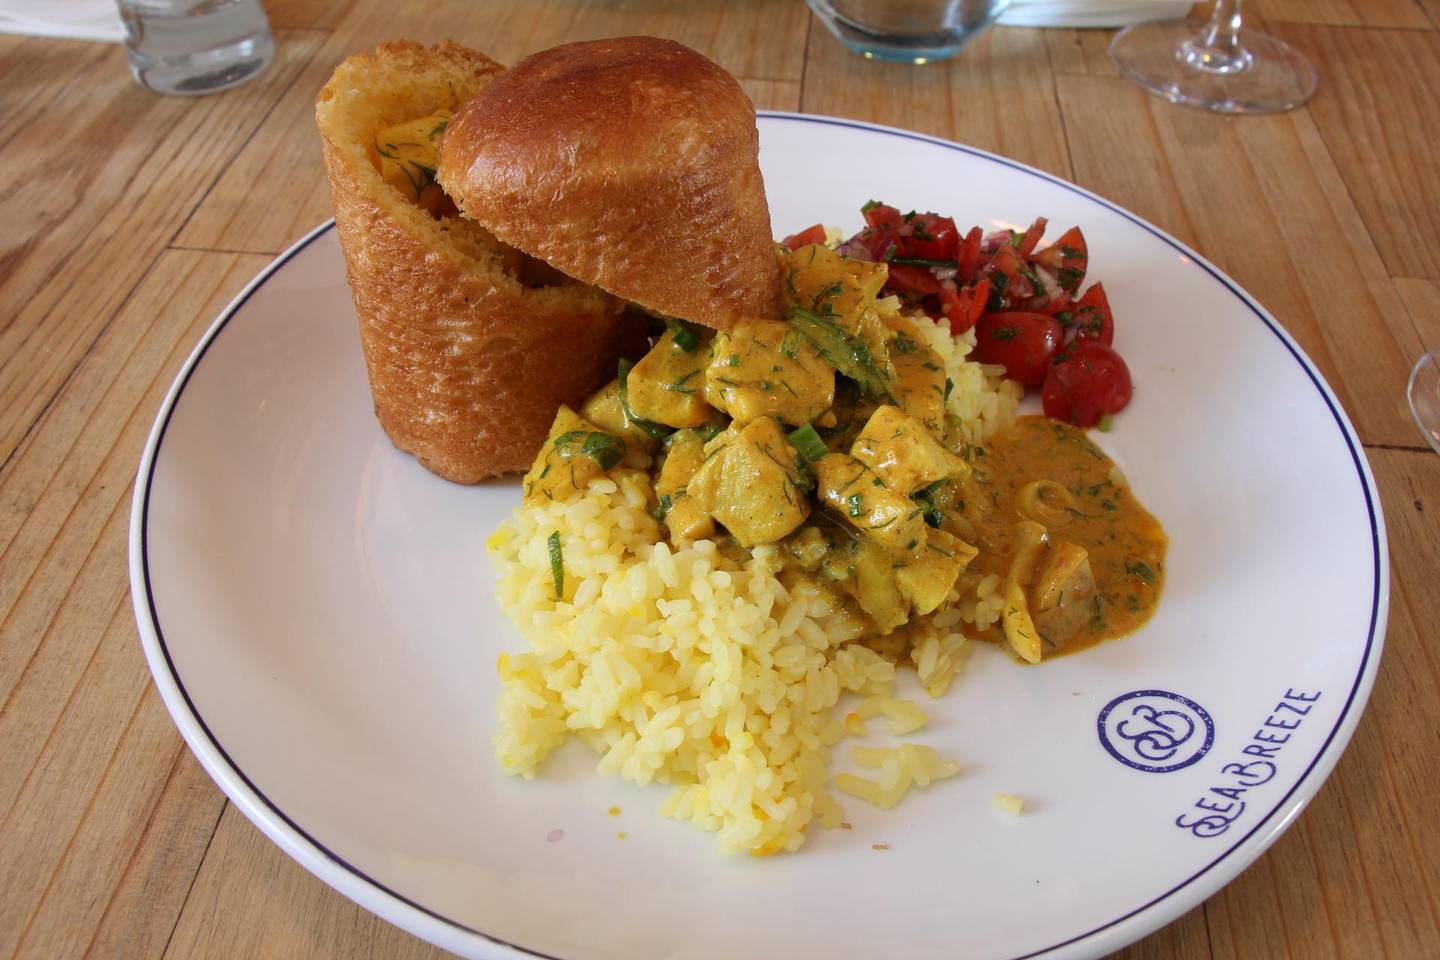 Curry fish bunny chow at Sea Breeze restaurant in Cape Town. John Brunton